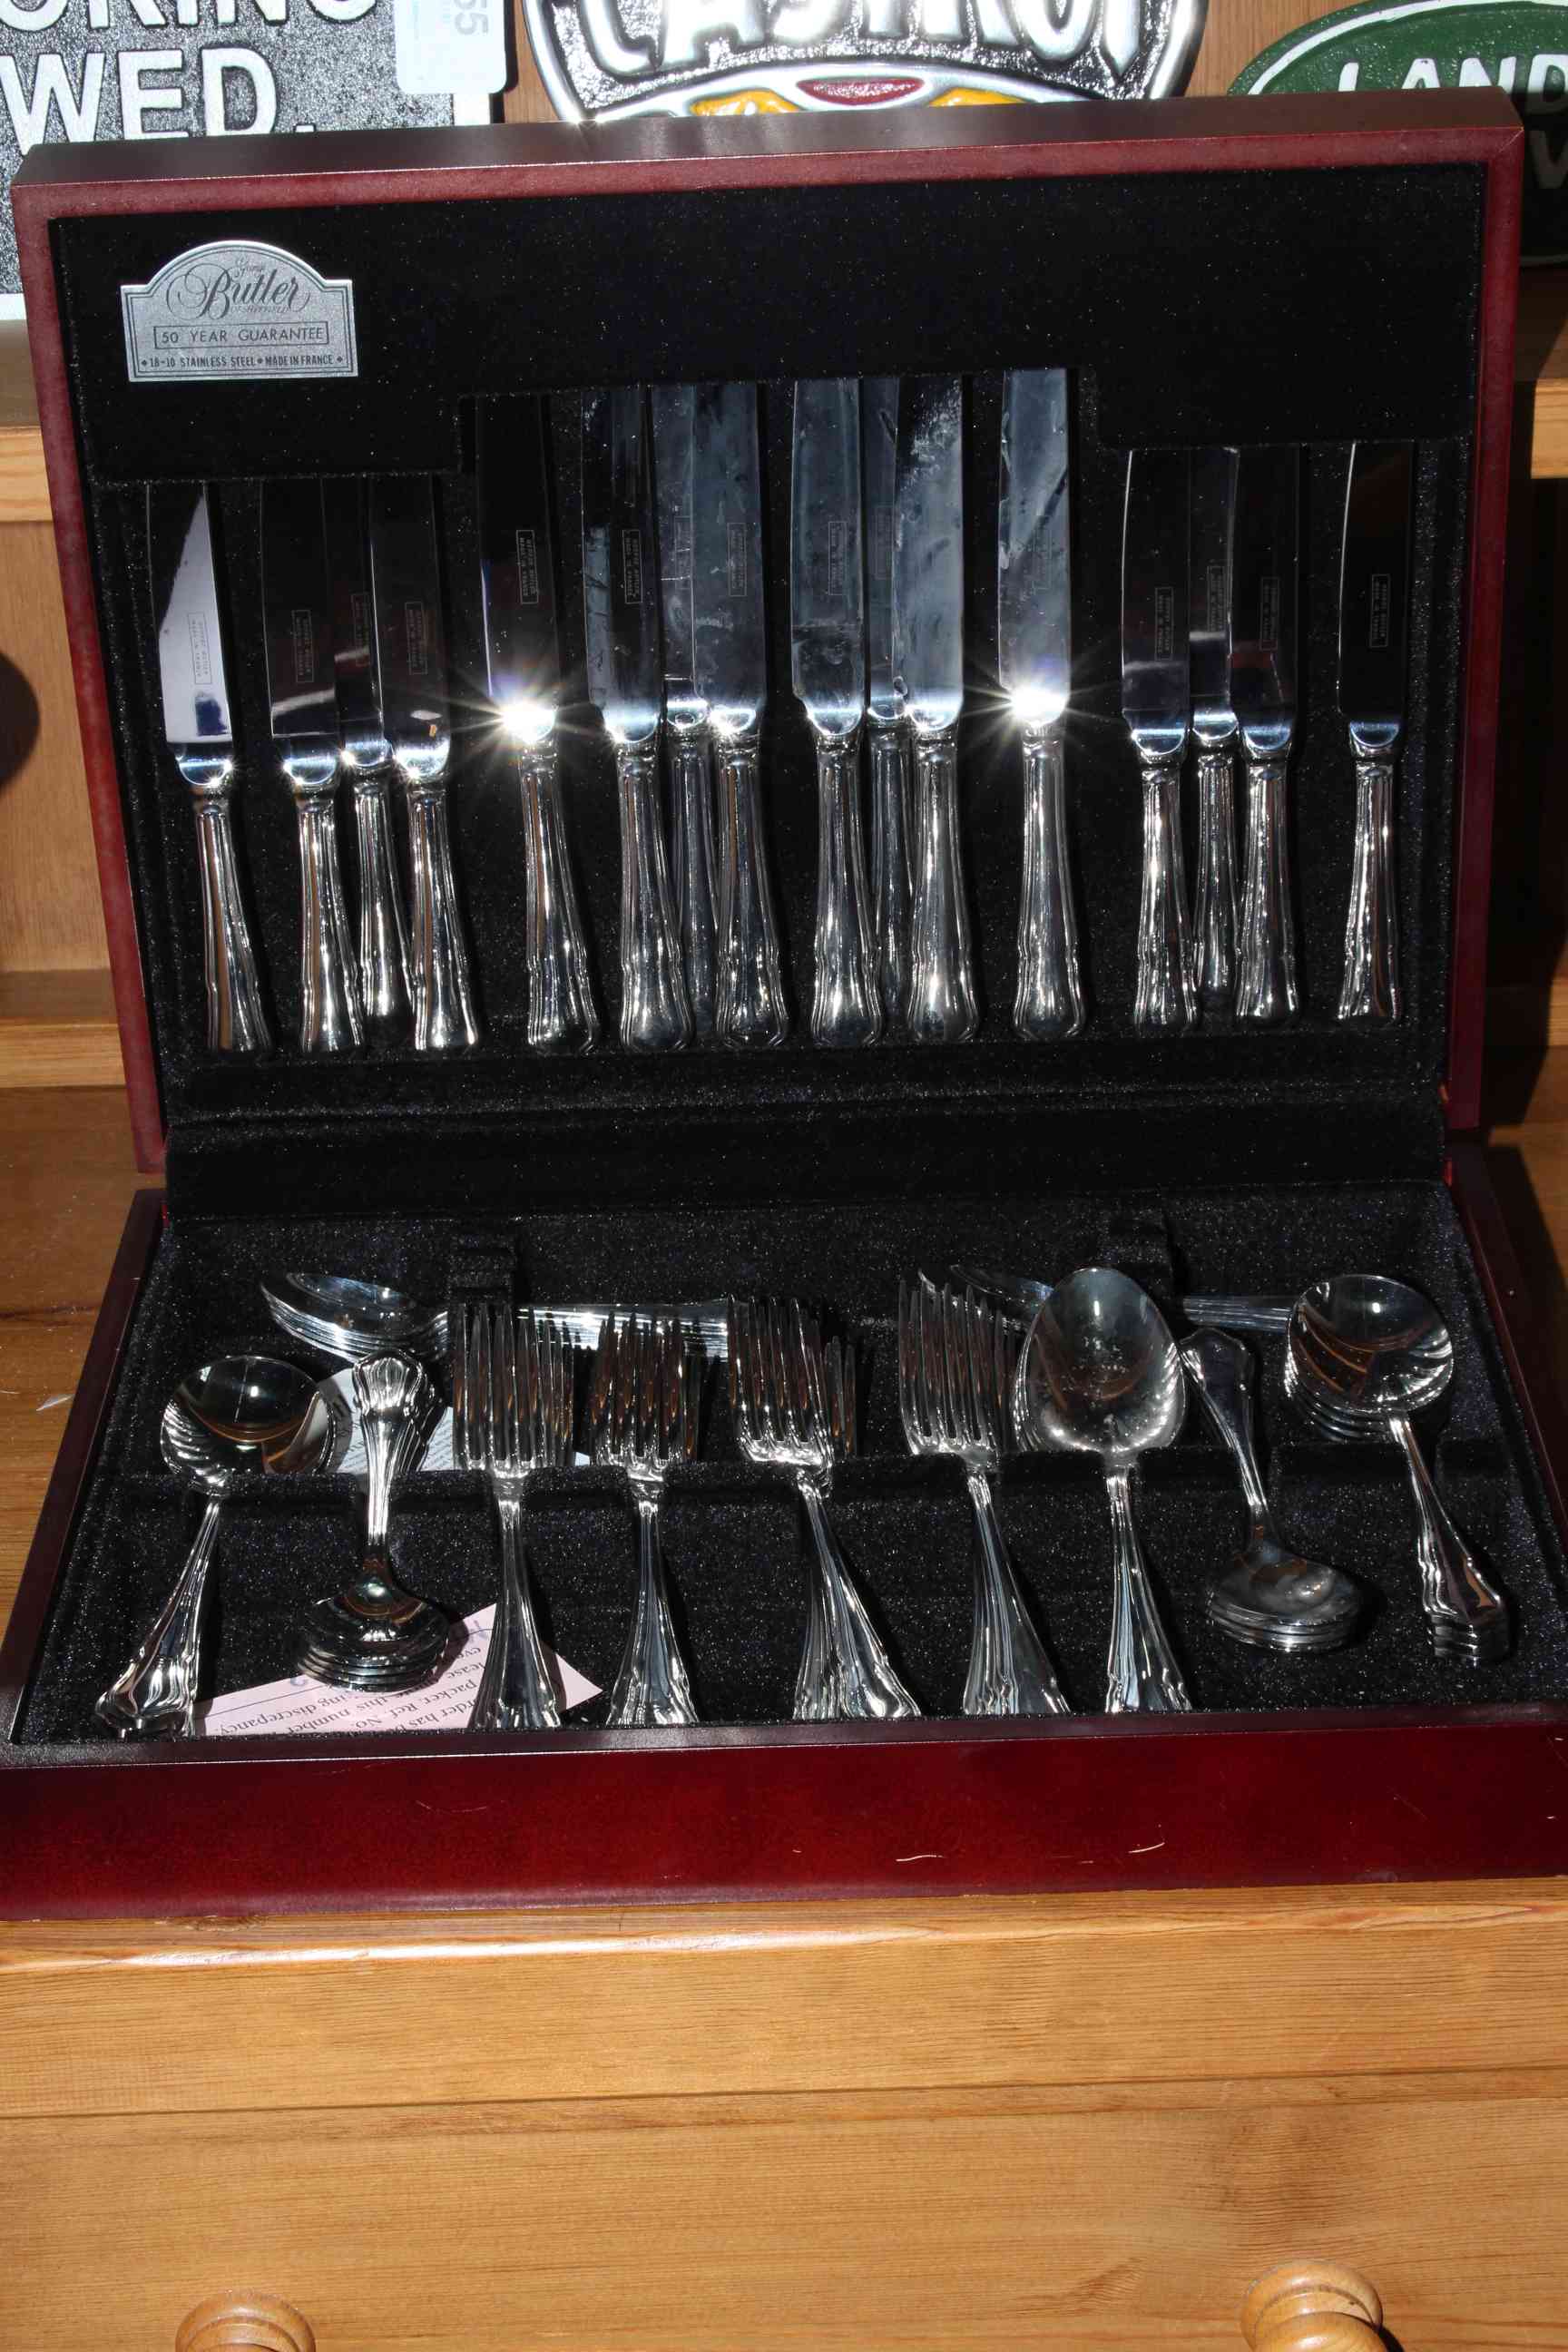 Butler canteen of cutlery in mahogany finish case.